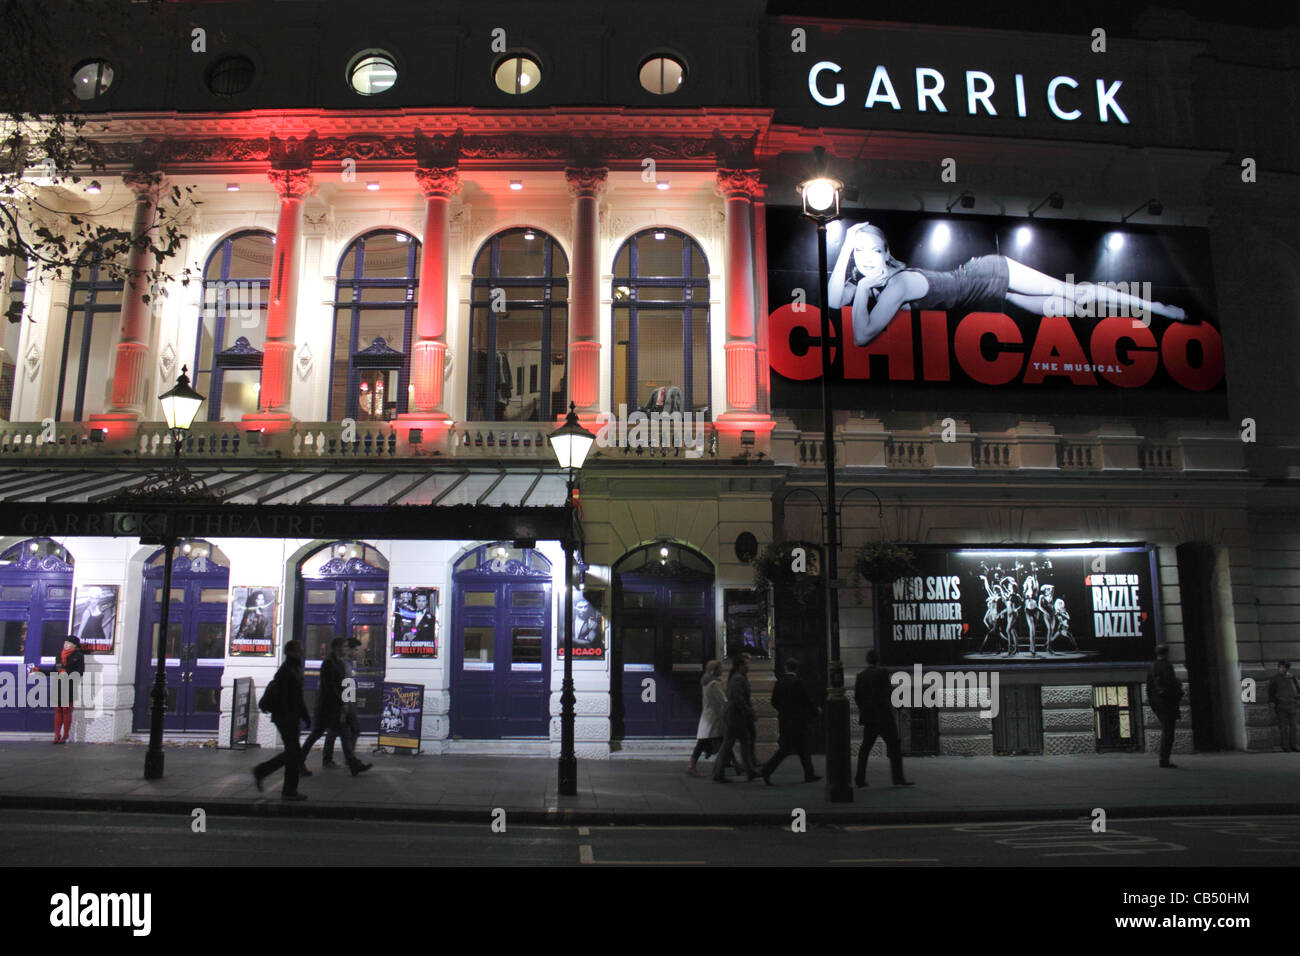 Chicago showing at the Garrick Theatre London November 2011 Stock Photo